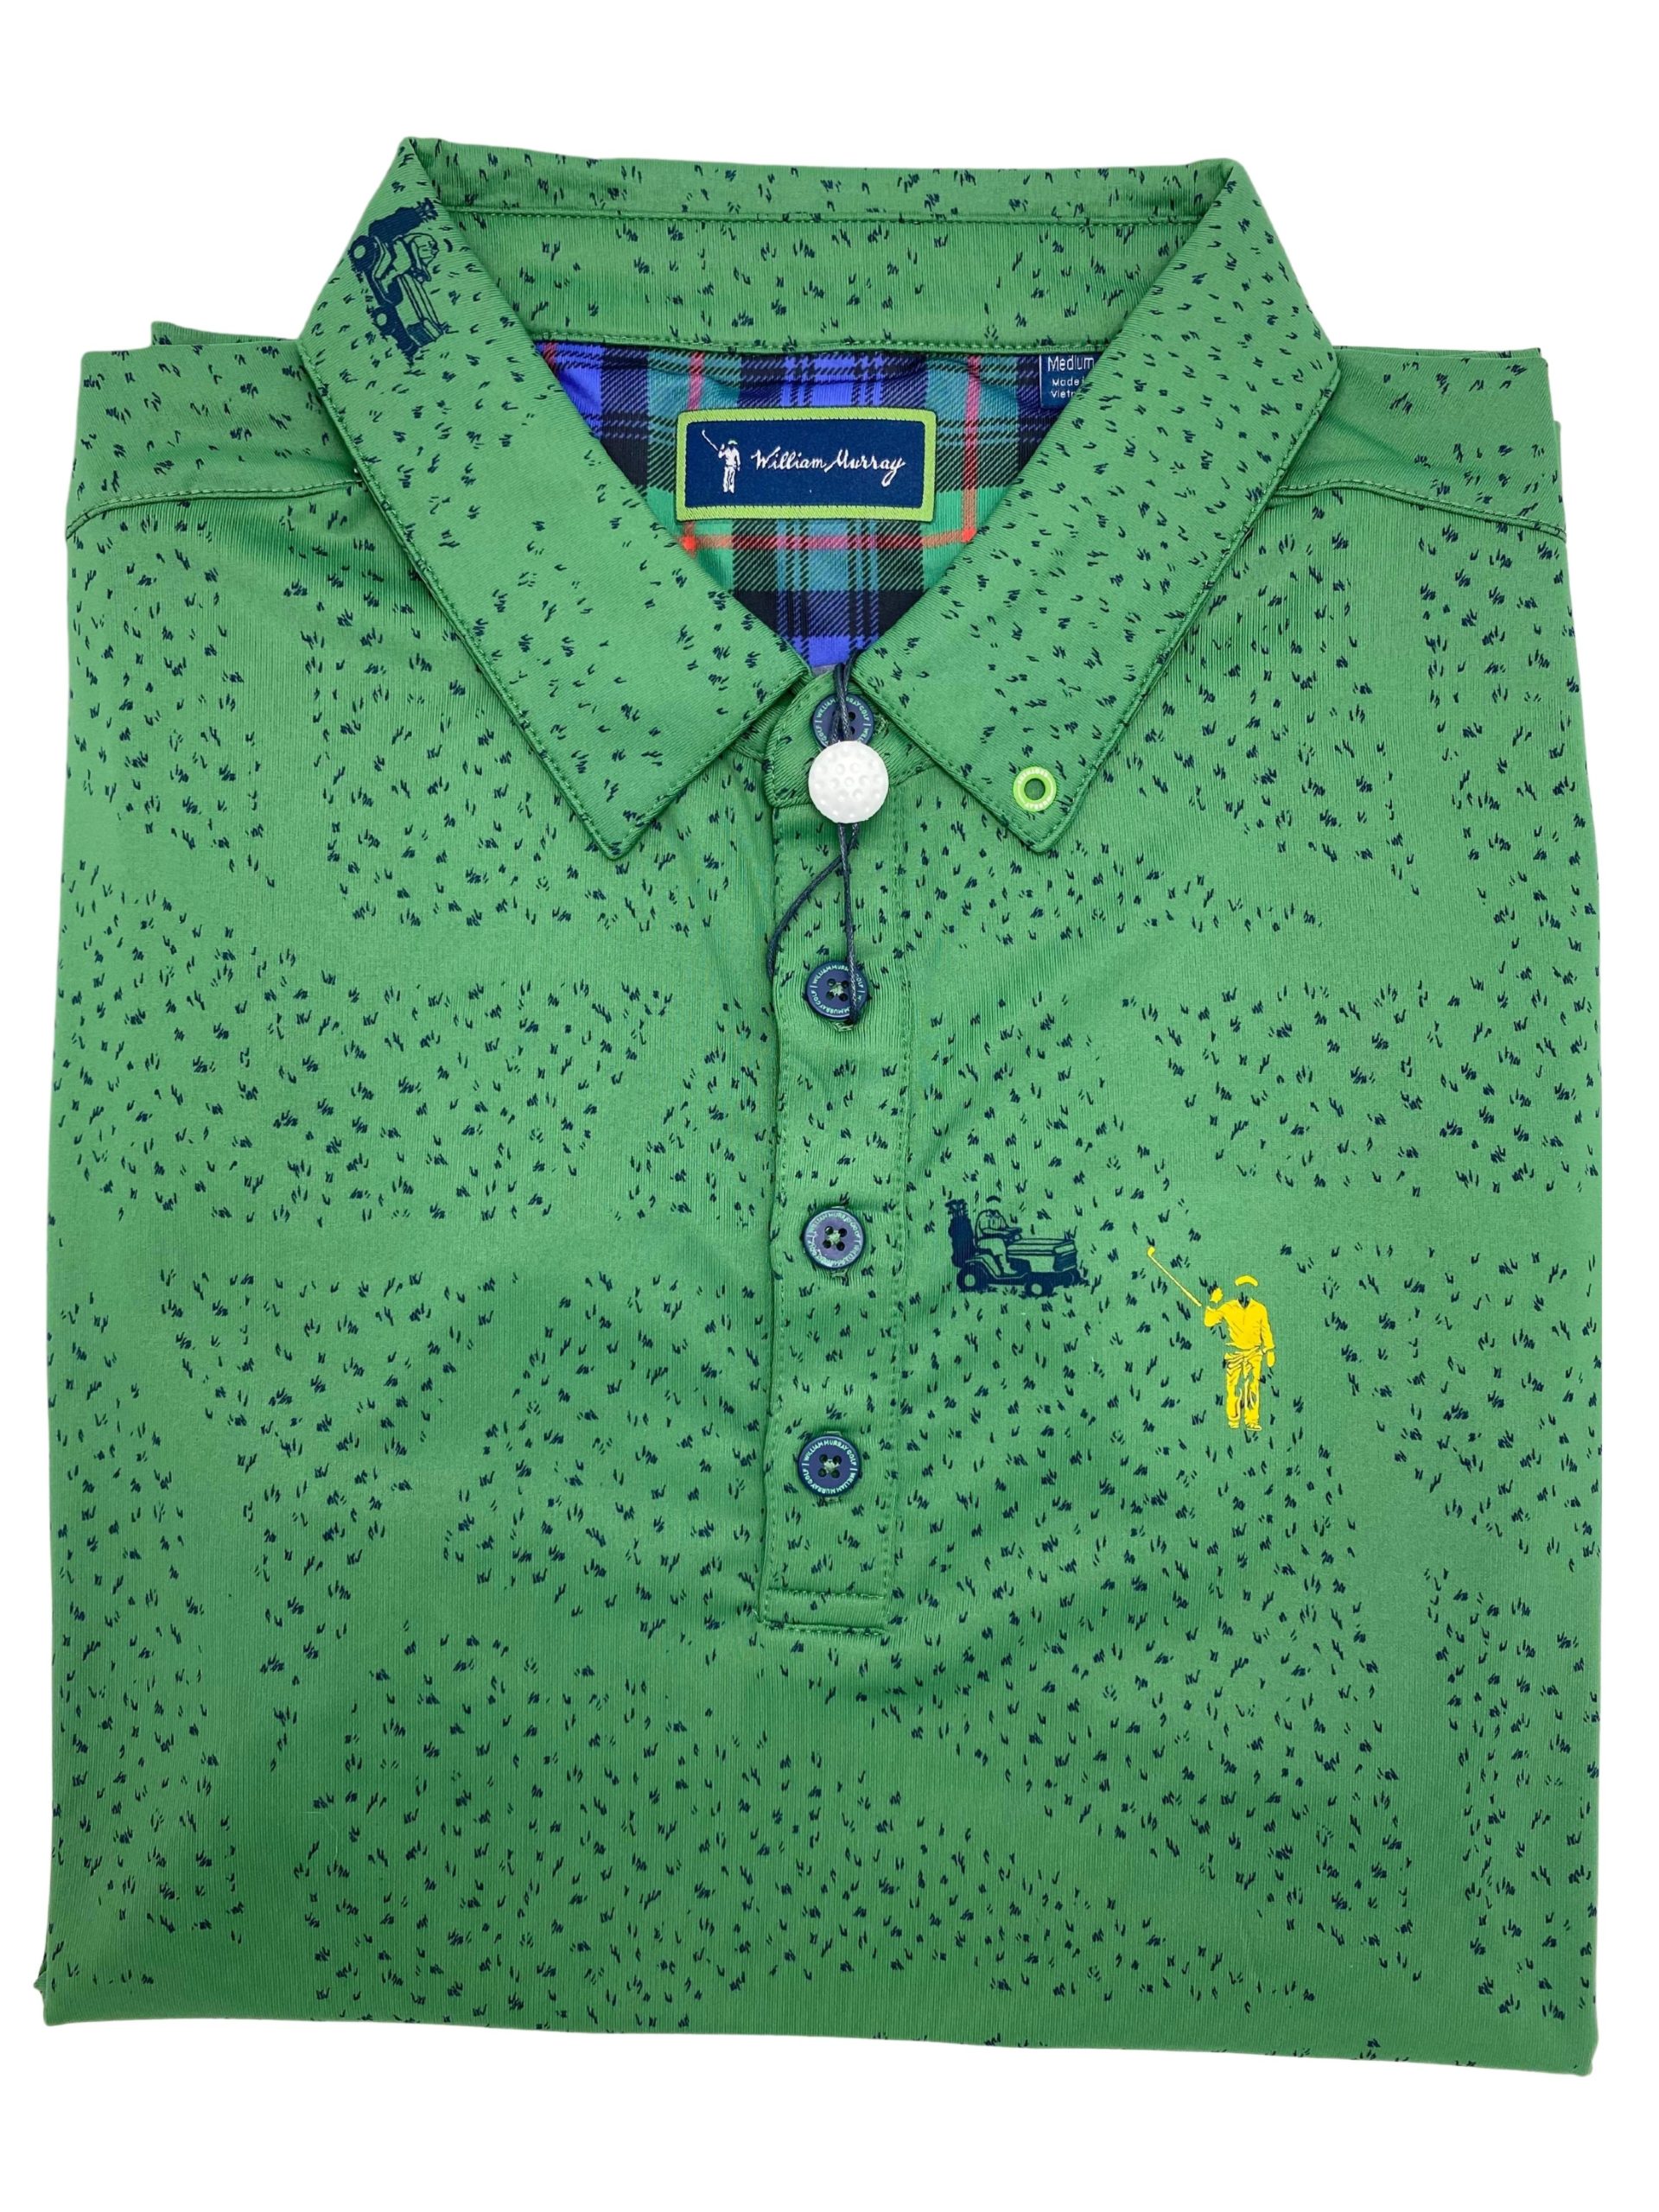 From Fairways to Runways: How Whimsical Prints and Wild Designs are Teeing  Up a Storm in Golf Polo Fashion - Haggin Oaks